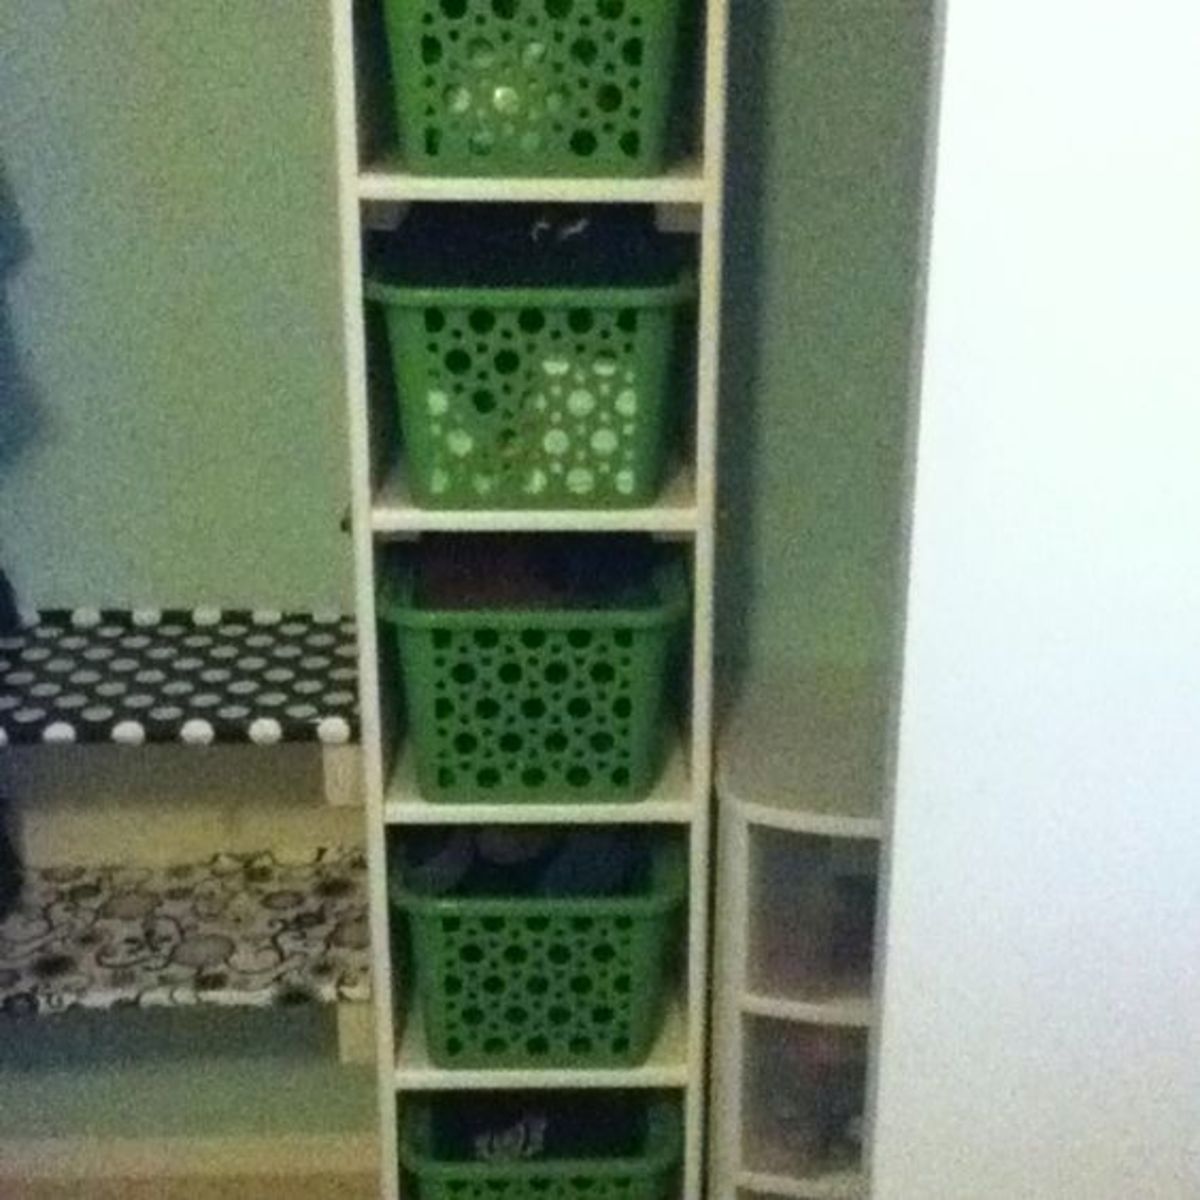 Organized closet! Dollar Tree baskets for shoes and hats